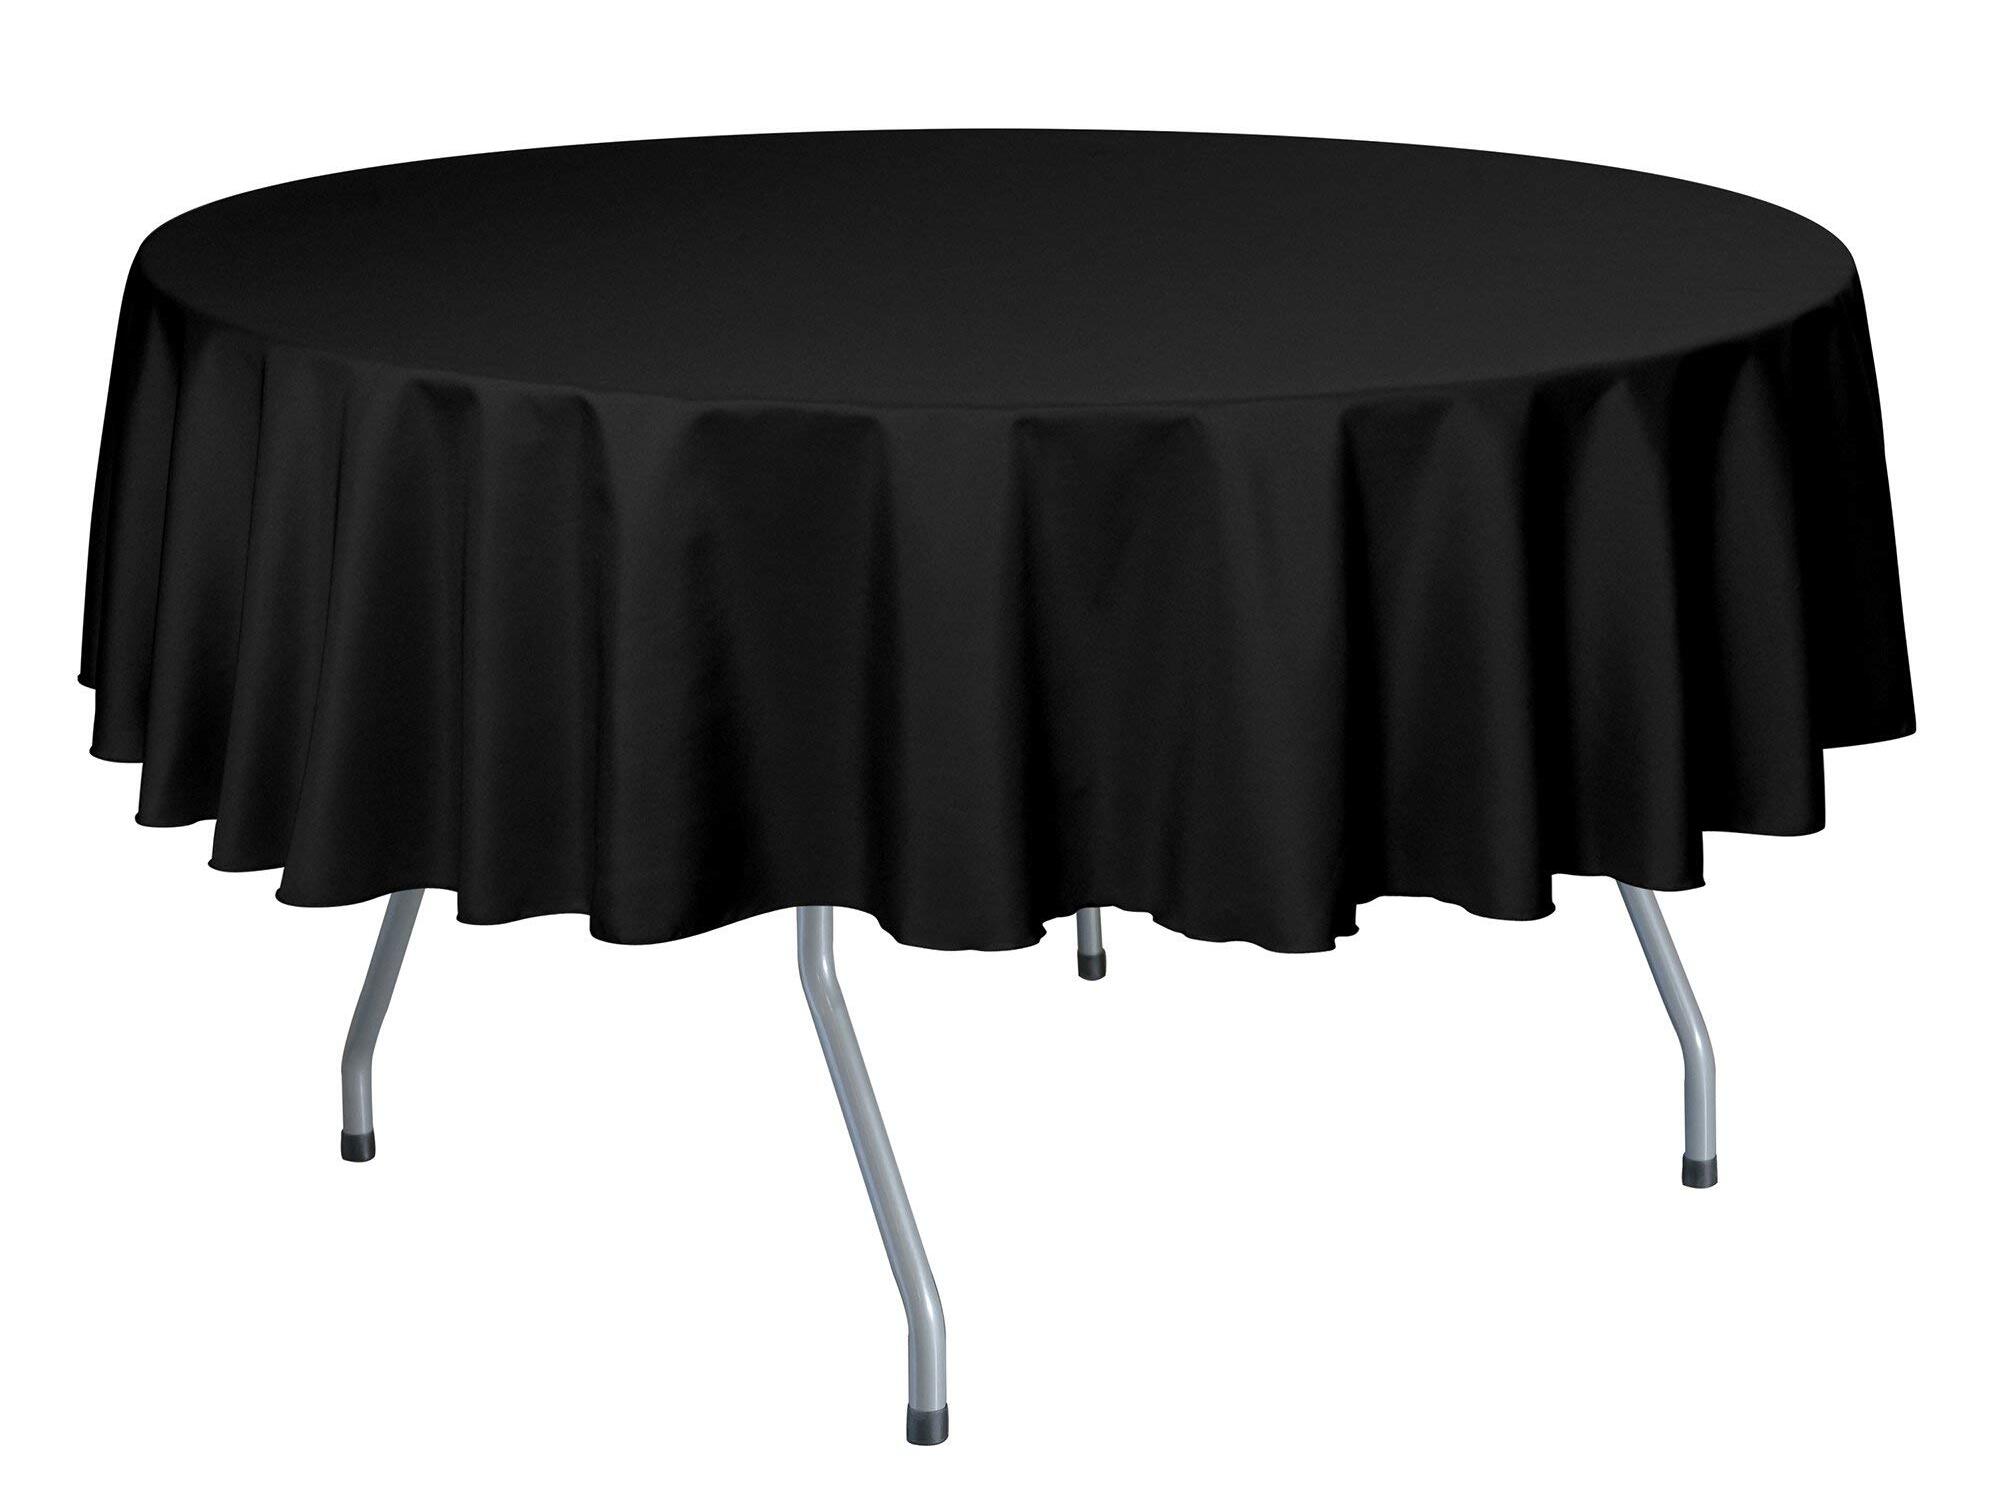 What Size Table Fits A 72-Inch Round Tablecloth?